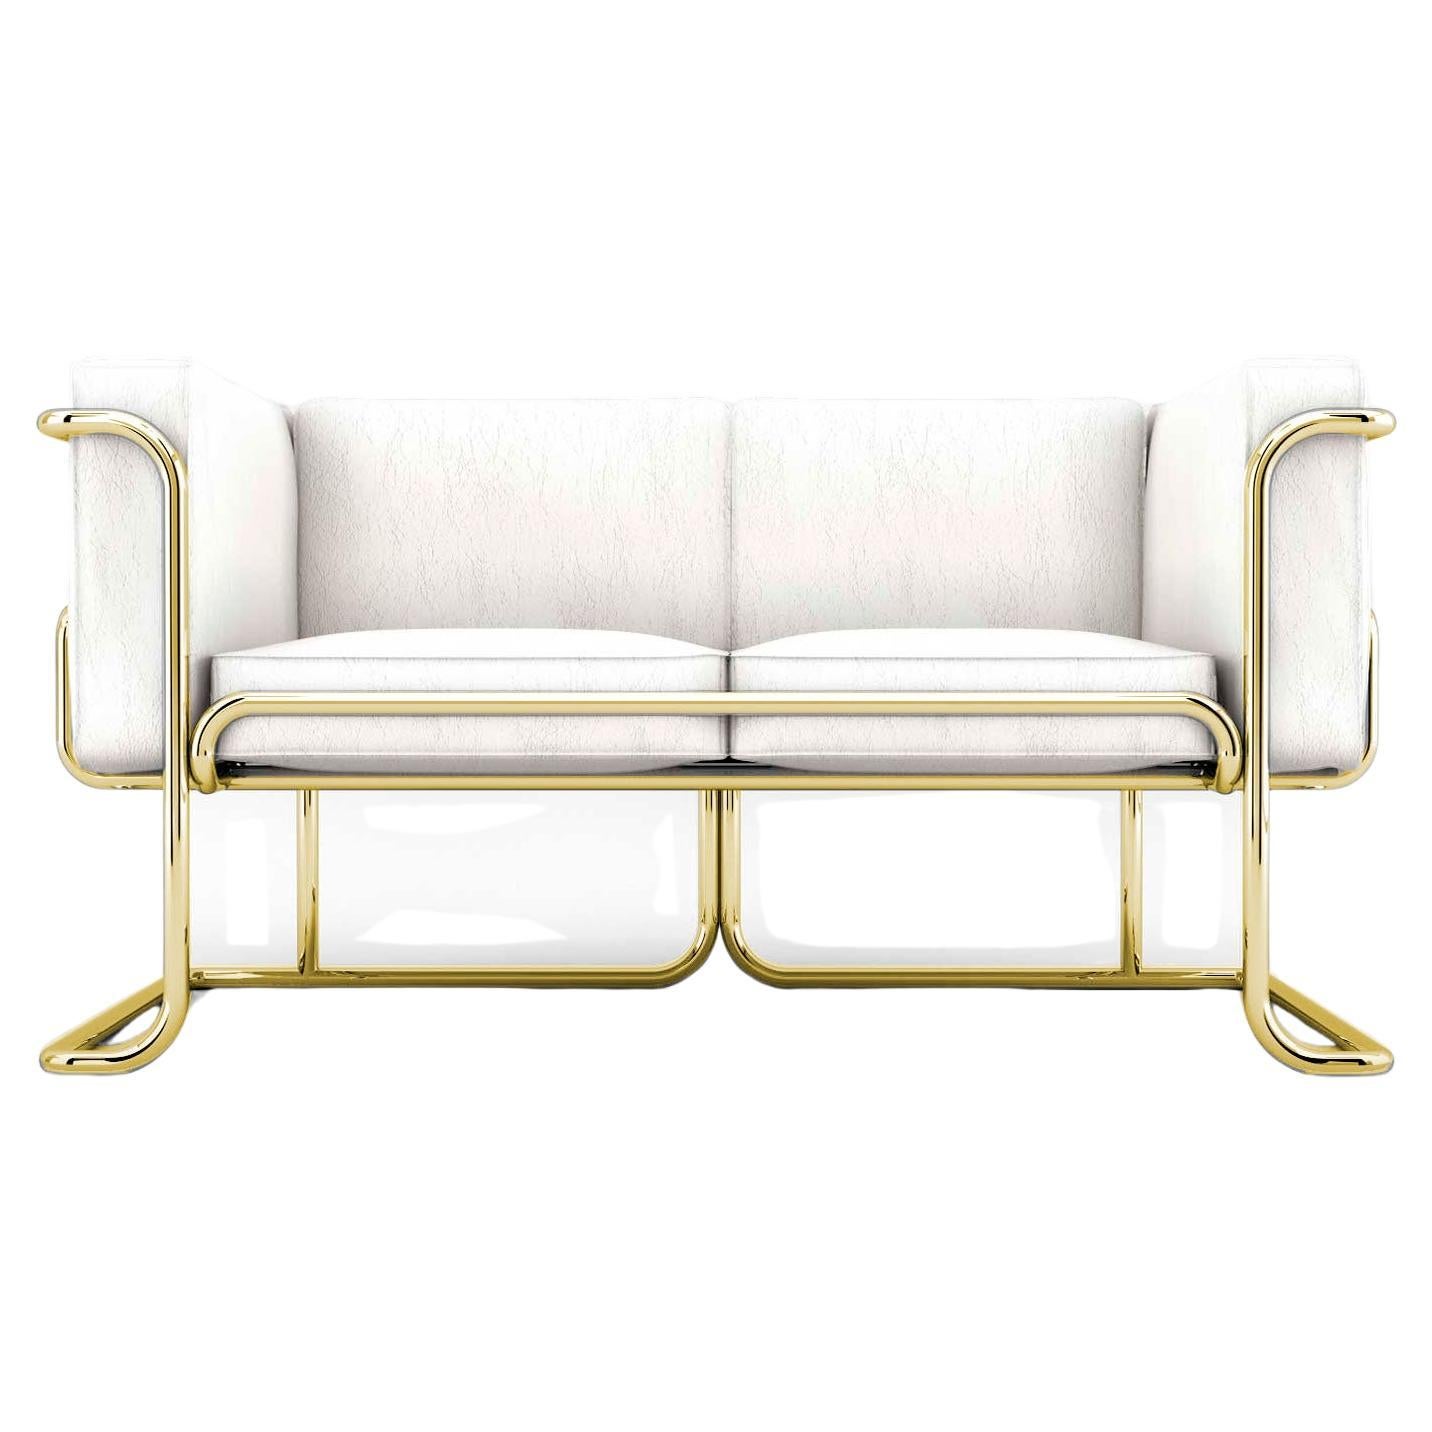 Lotus 2 Seat Sofa - Modern White Leather Sofa with Brass Legs For Sale